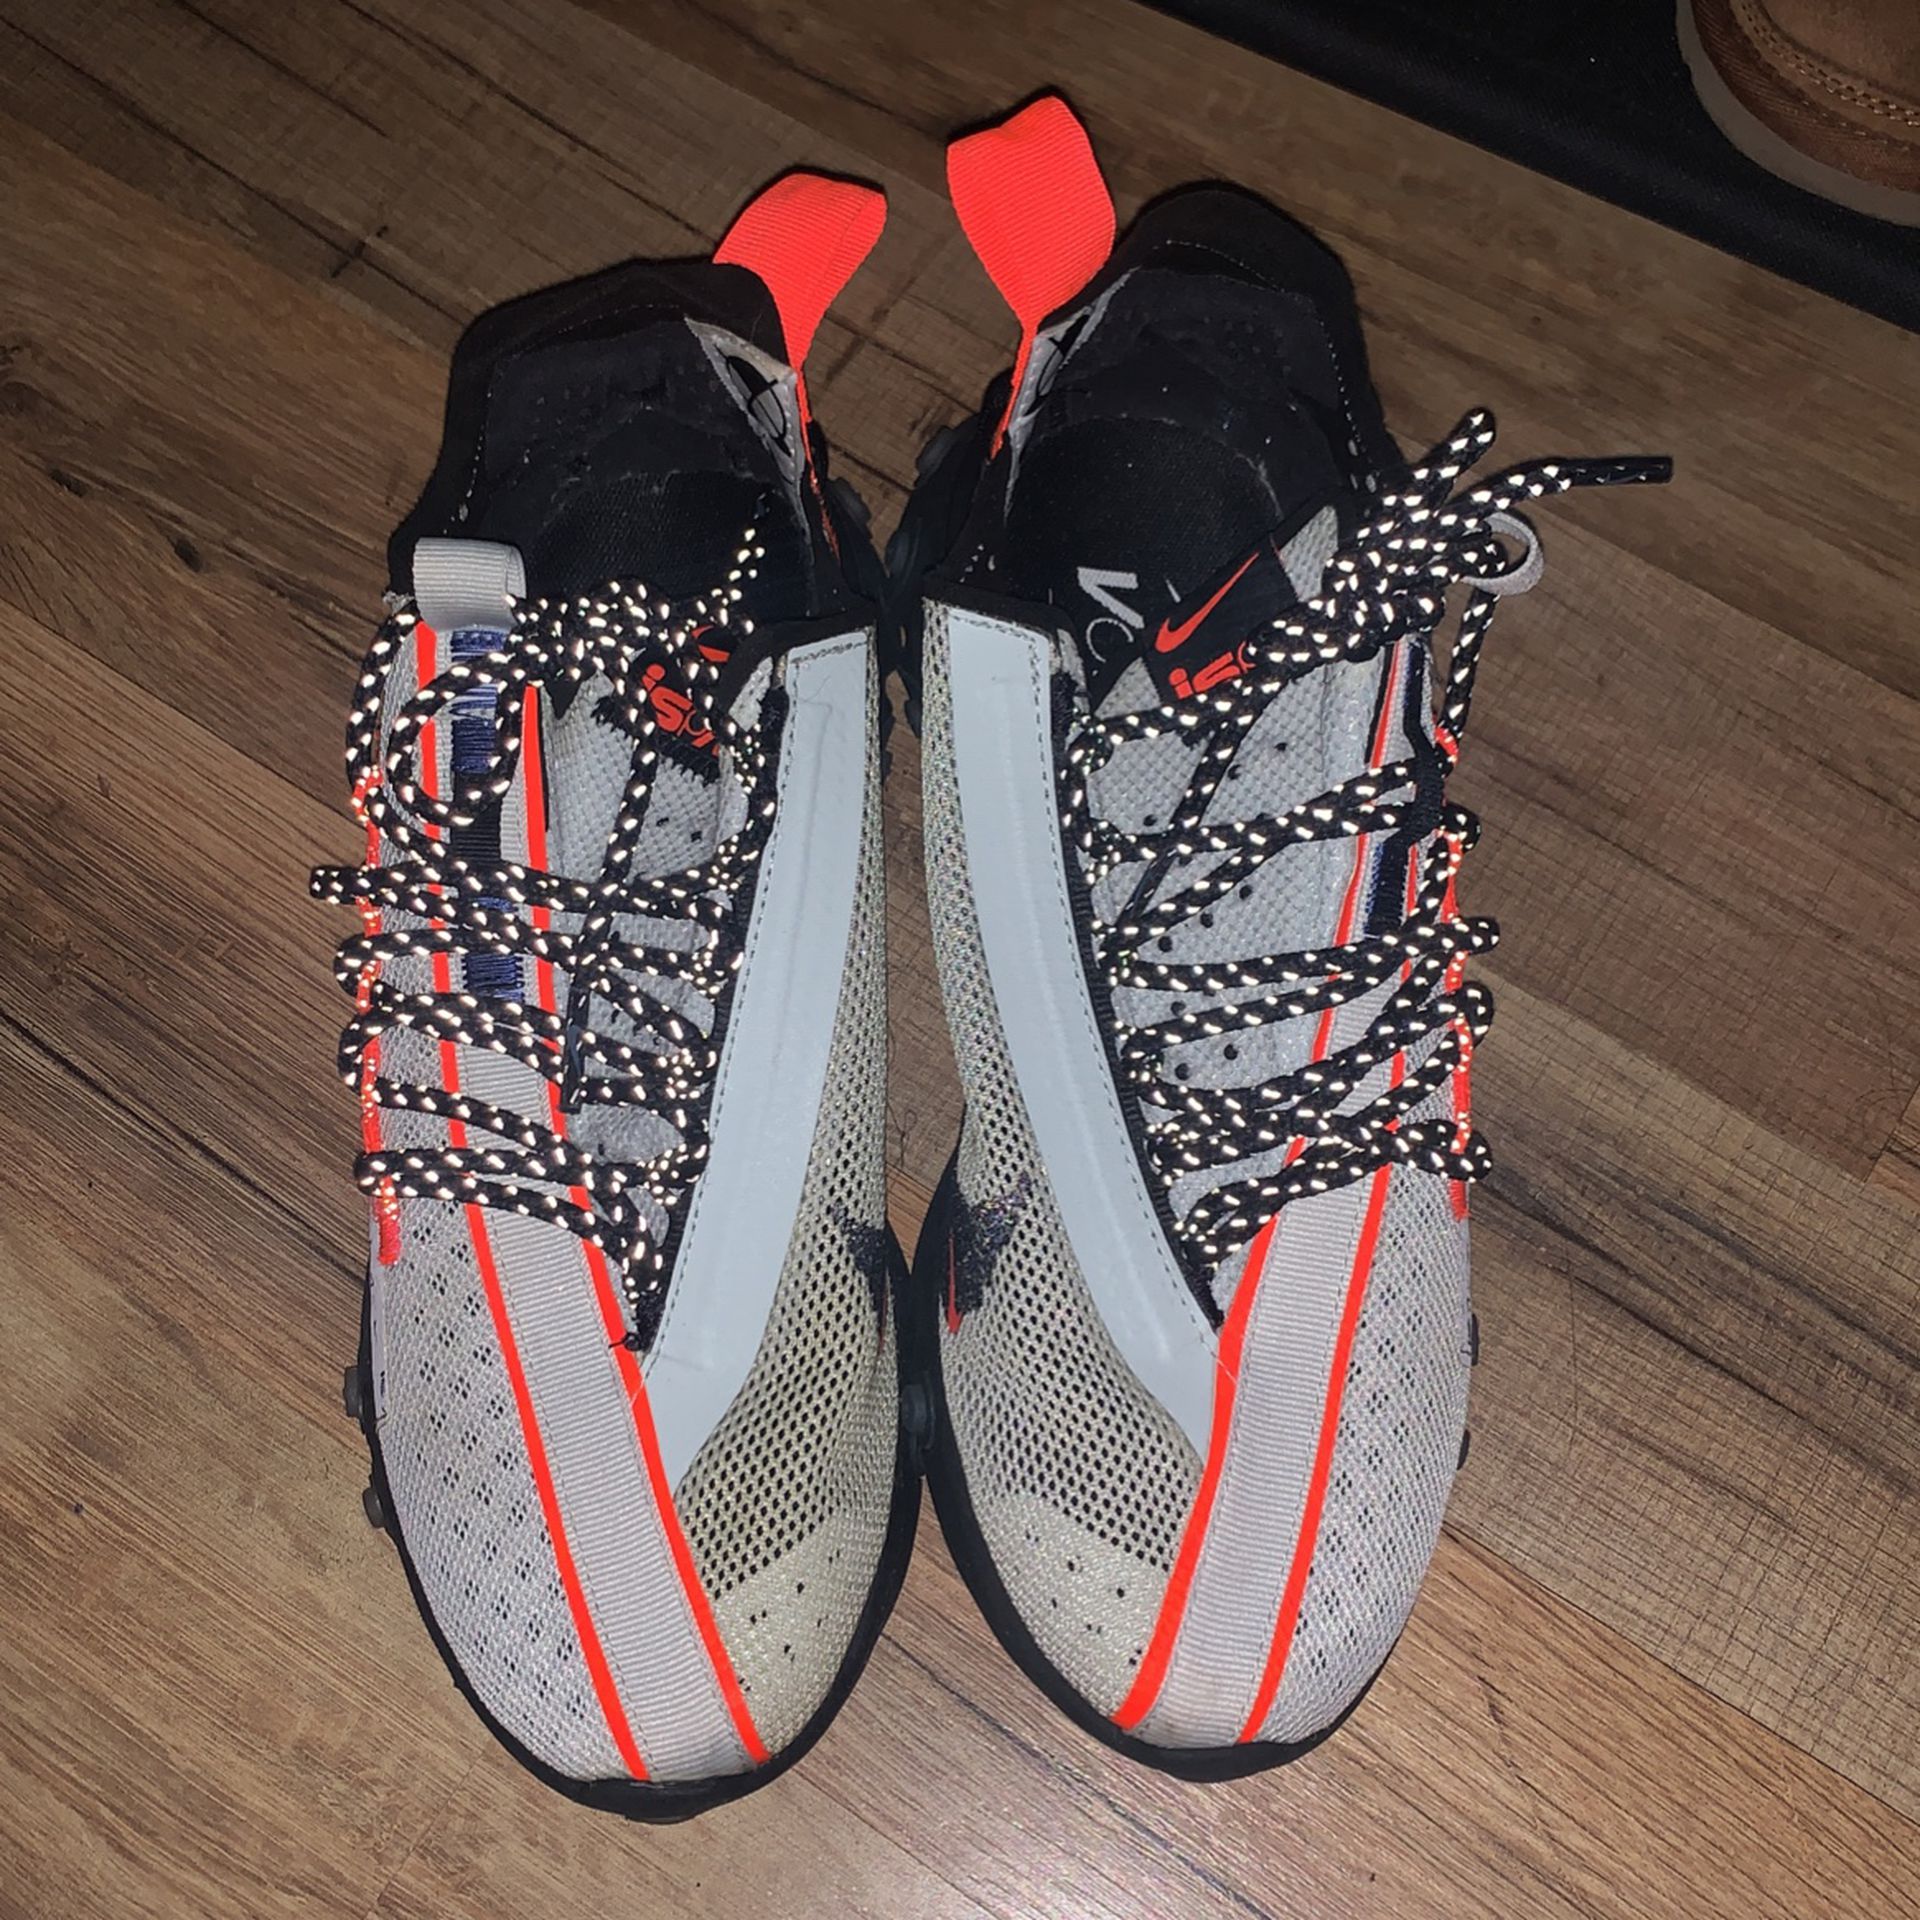 Nike React WR ISPA 'Ghost Size 5.5Y Boys for Sale in New Paltz, NY OfferUp